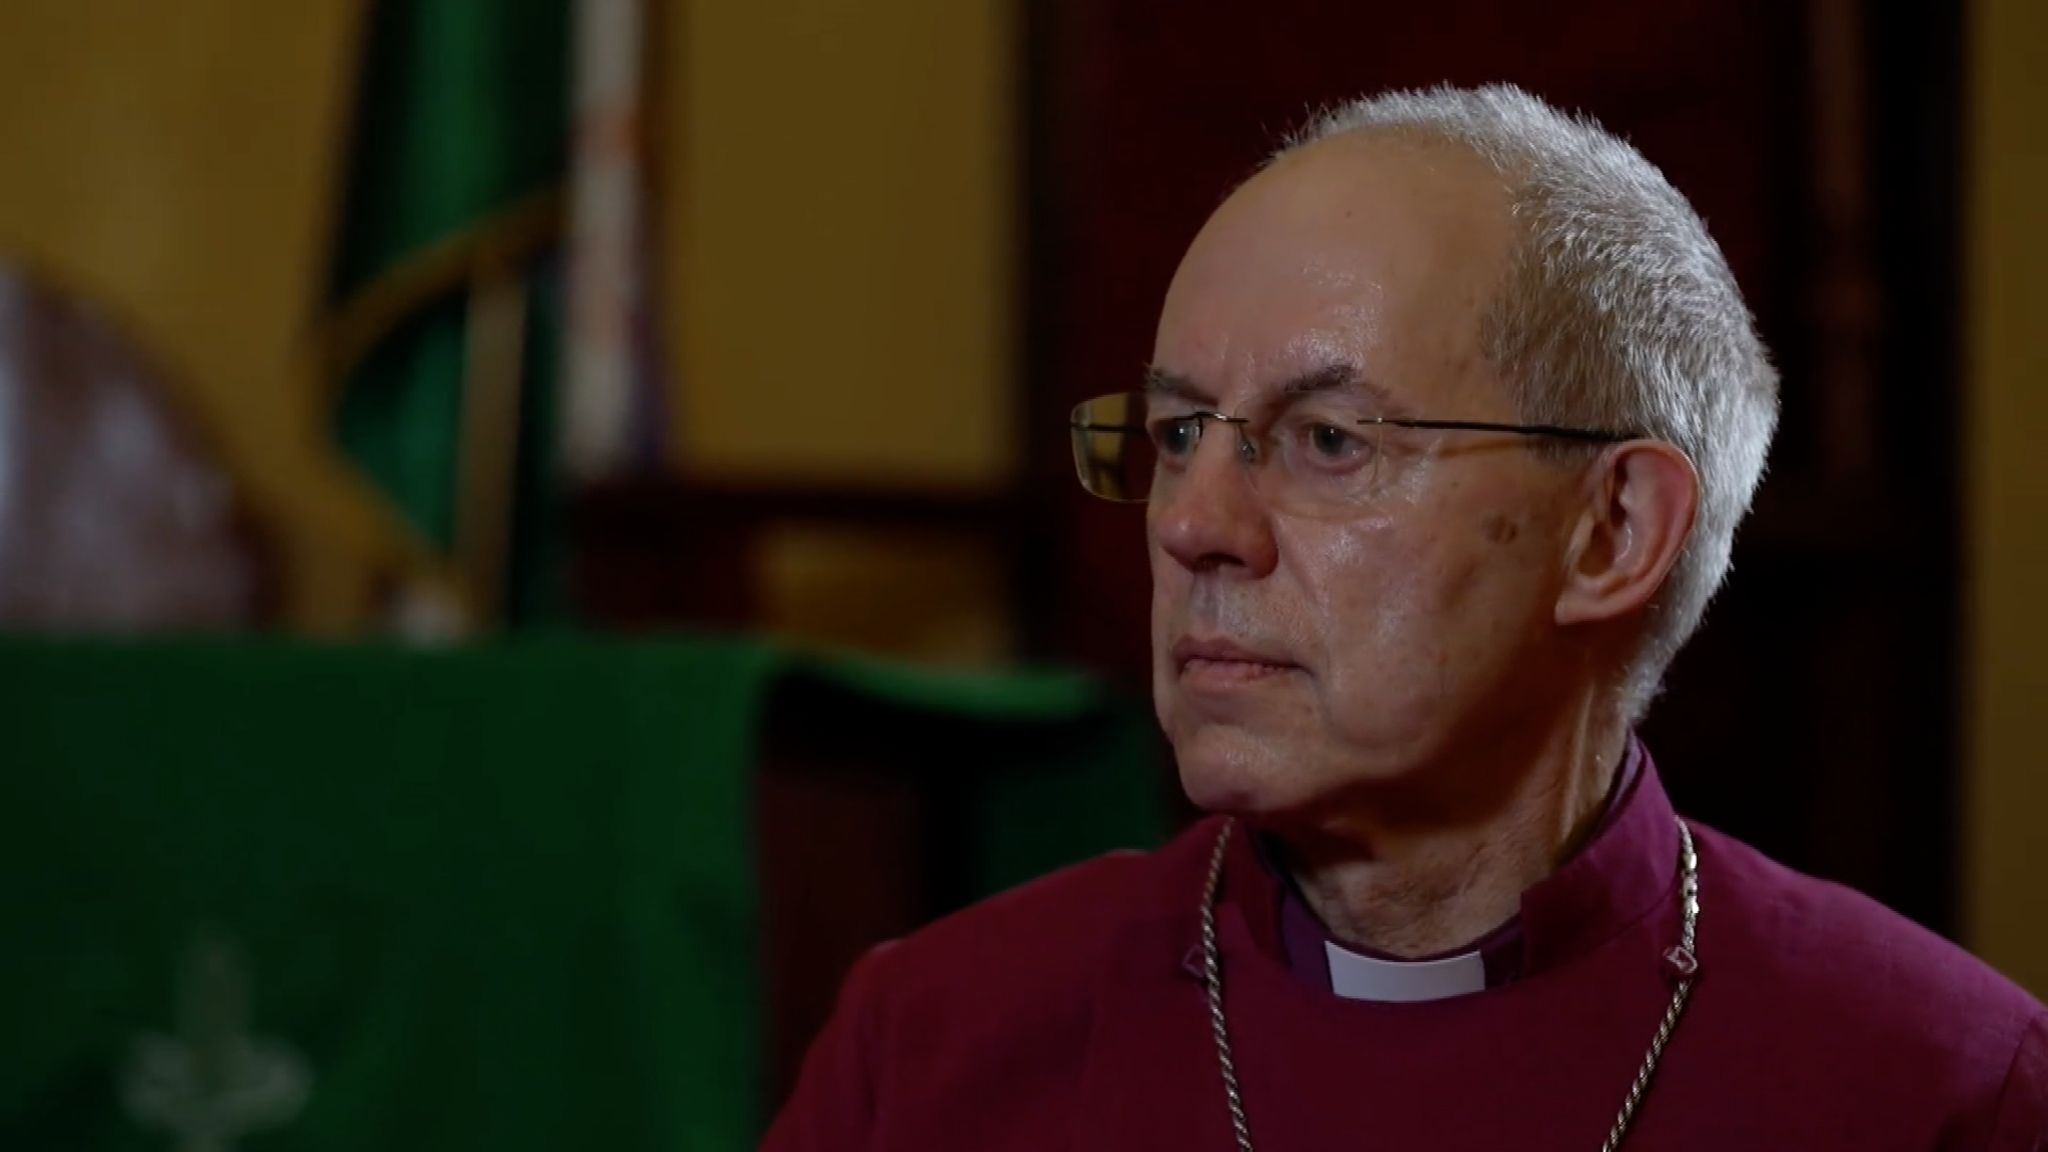 Justin Welby, with short balding grey hair and glasses looks to the side in an interview as he wears a purple cassoc and a large cross around his neck.